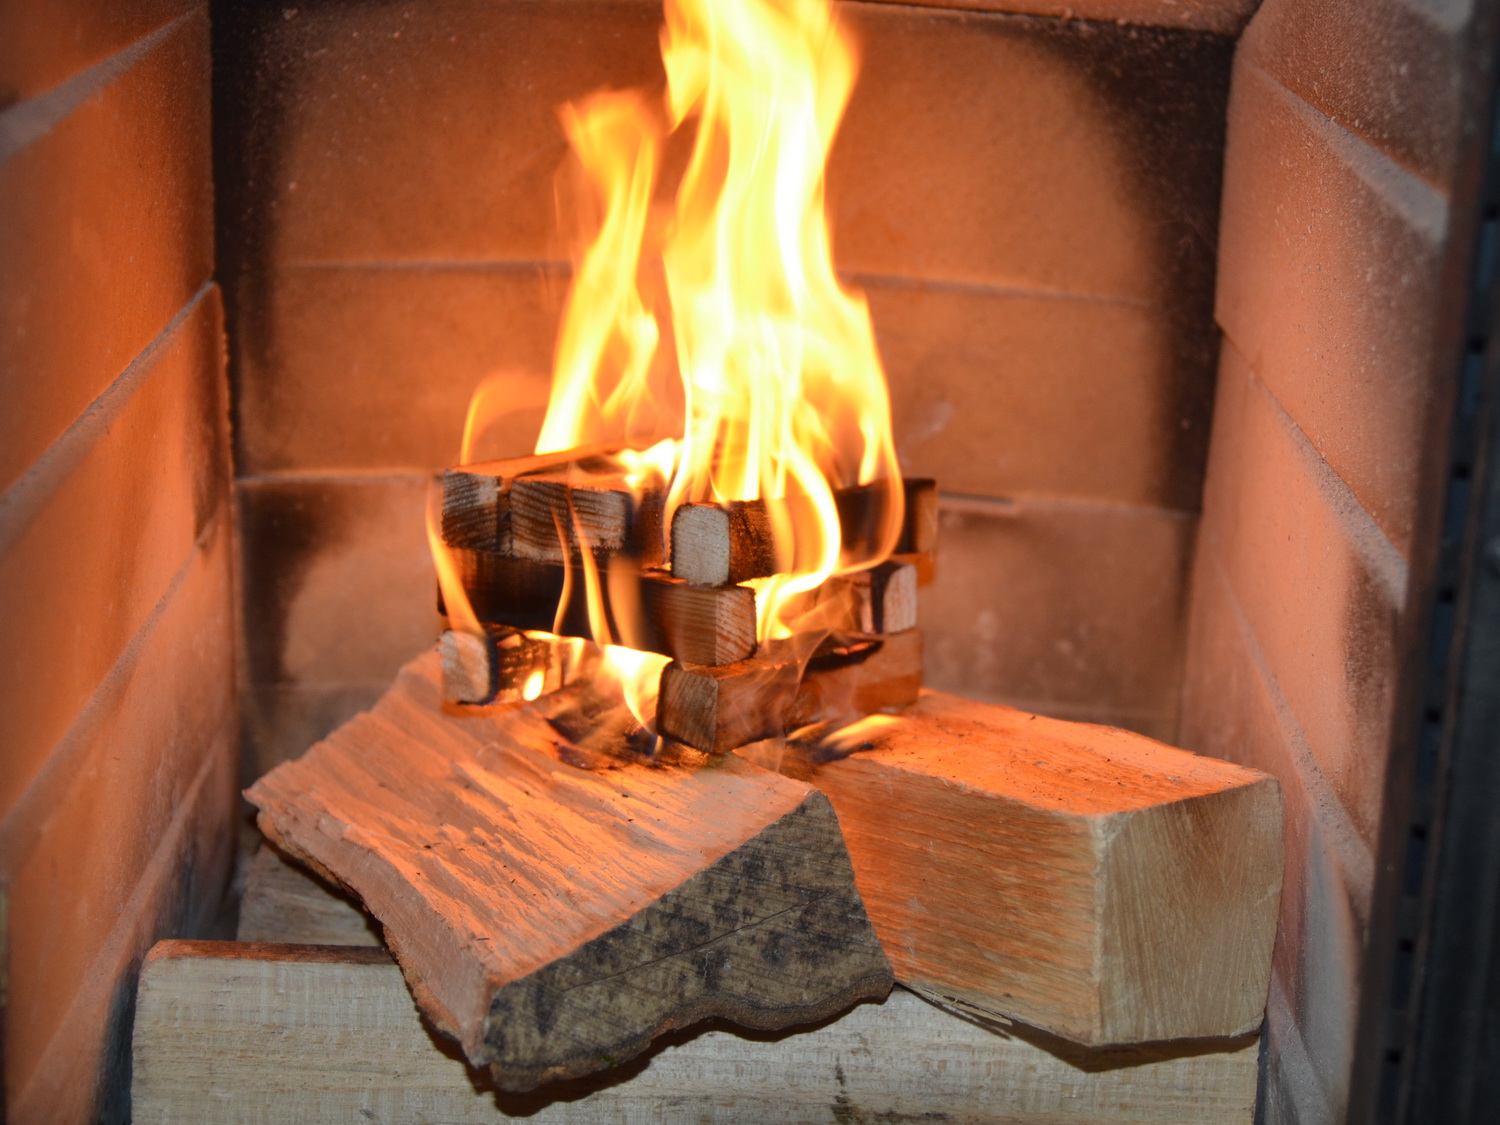 No Kindling Required Fireplaces Stock Your Home Vegetable Oil Fire Starters Fire Pits Fire Starter Squares for Campfires Coal Stoves 144 Squares - Eco-Friendly Grill Fire Starters Grills 